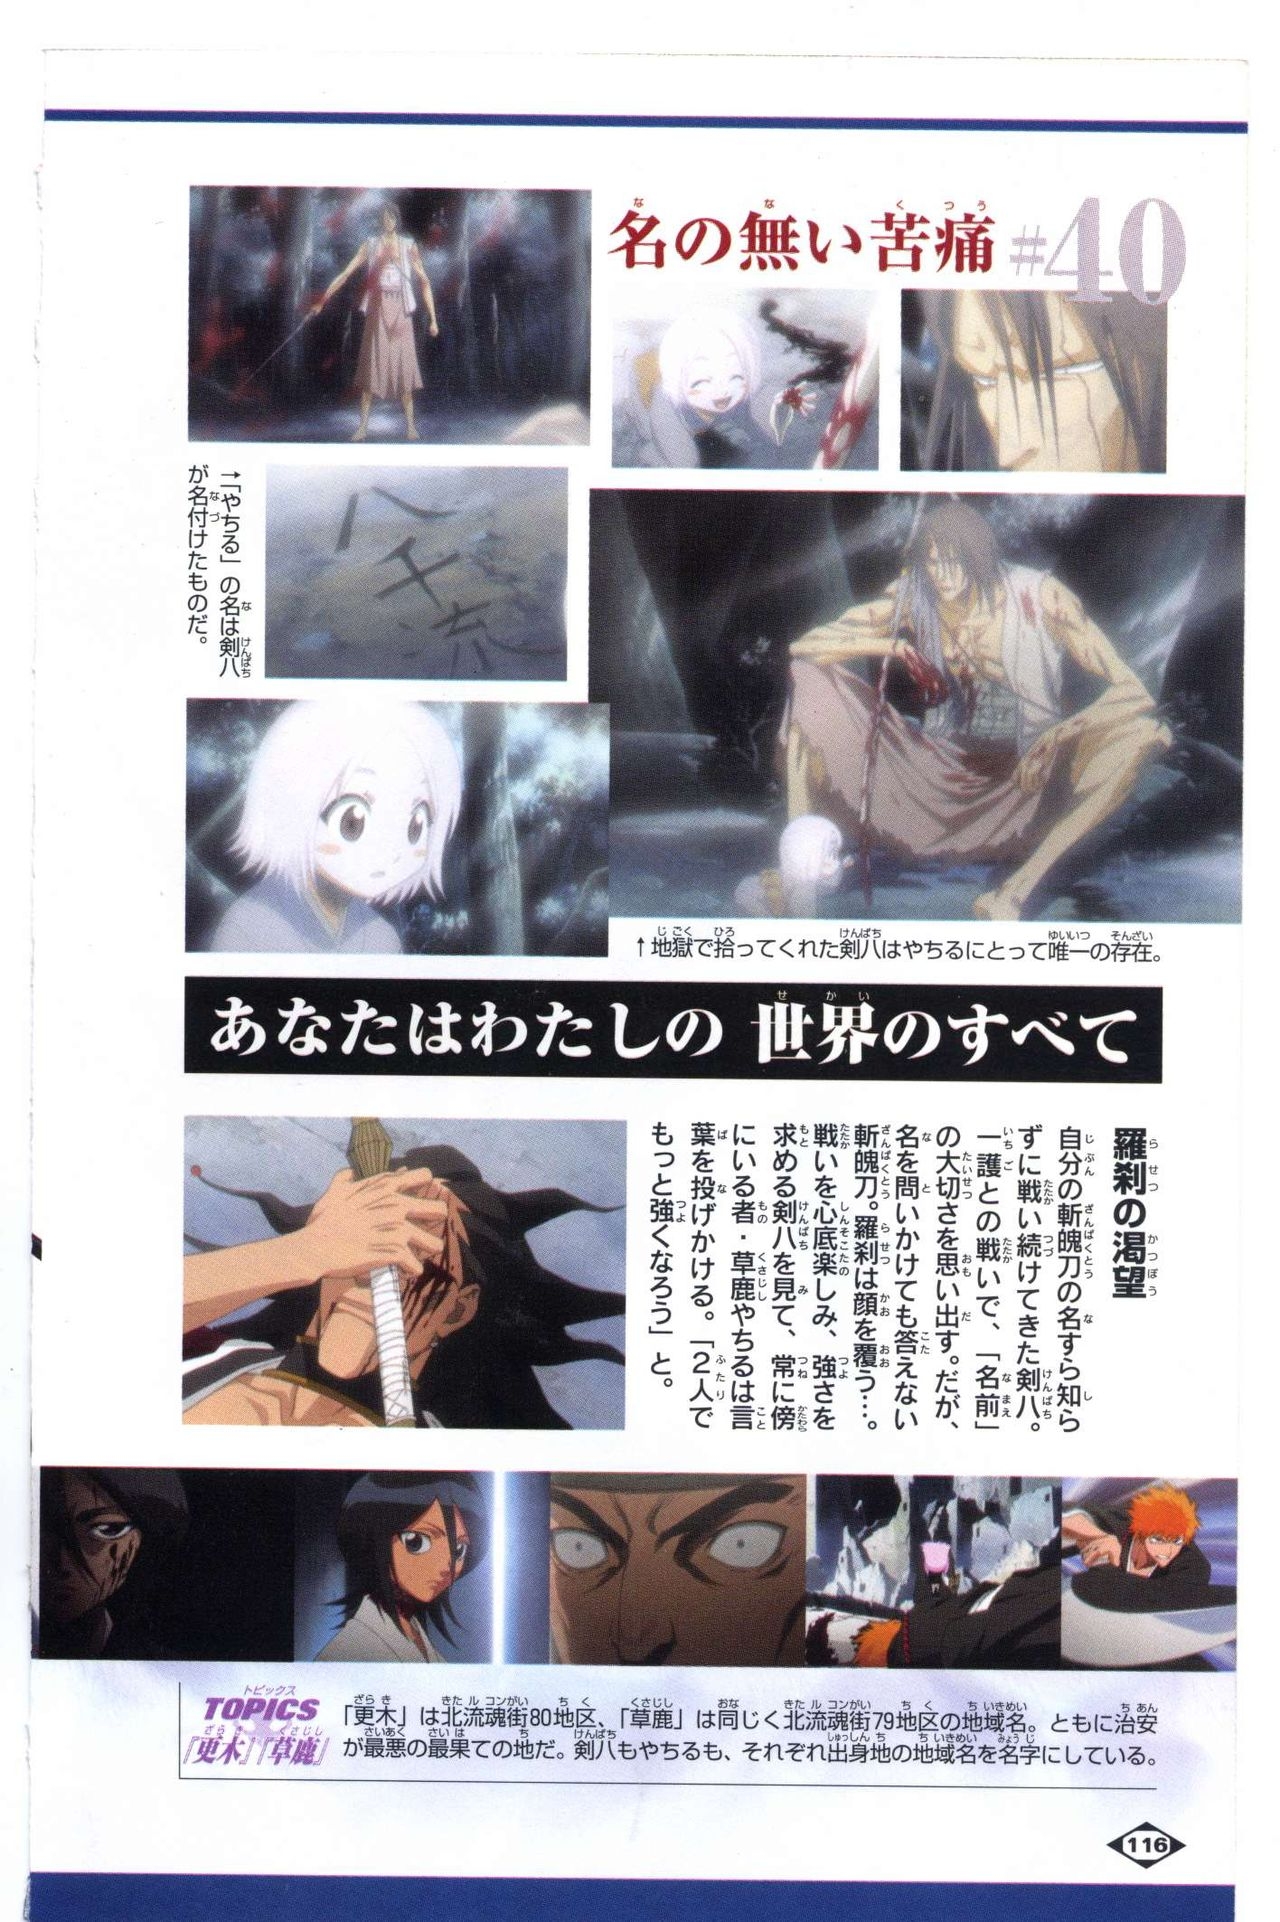 Bleach: Official Animation Book VIBEs 116